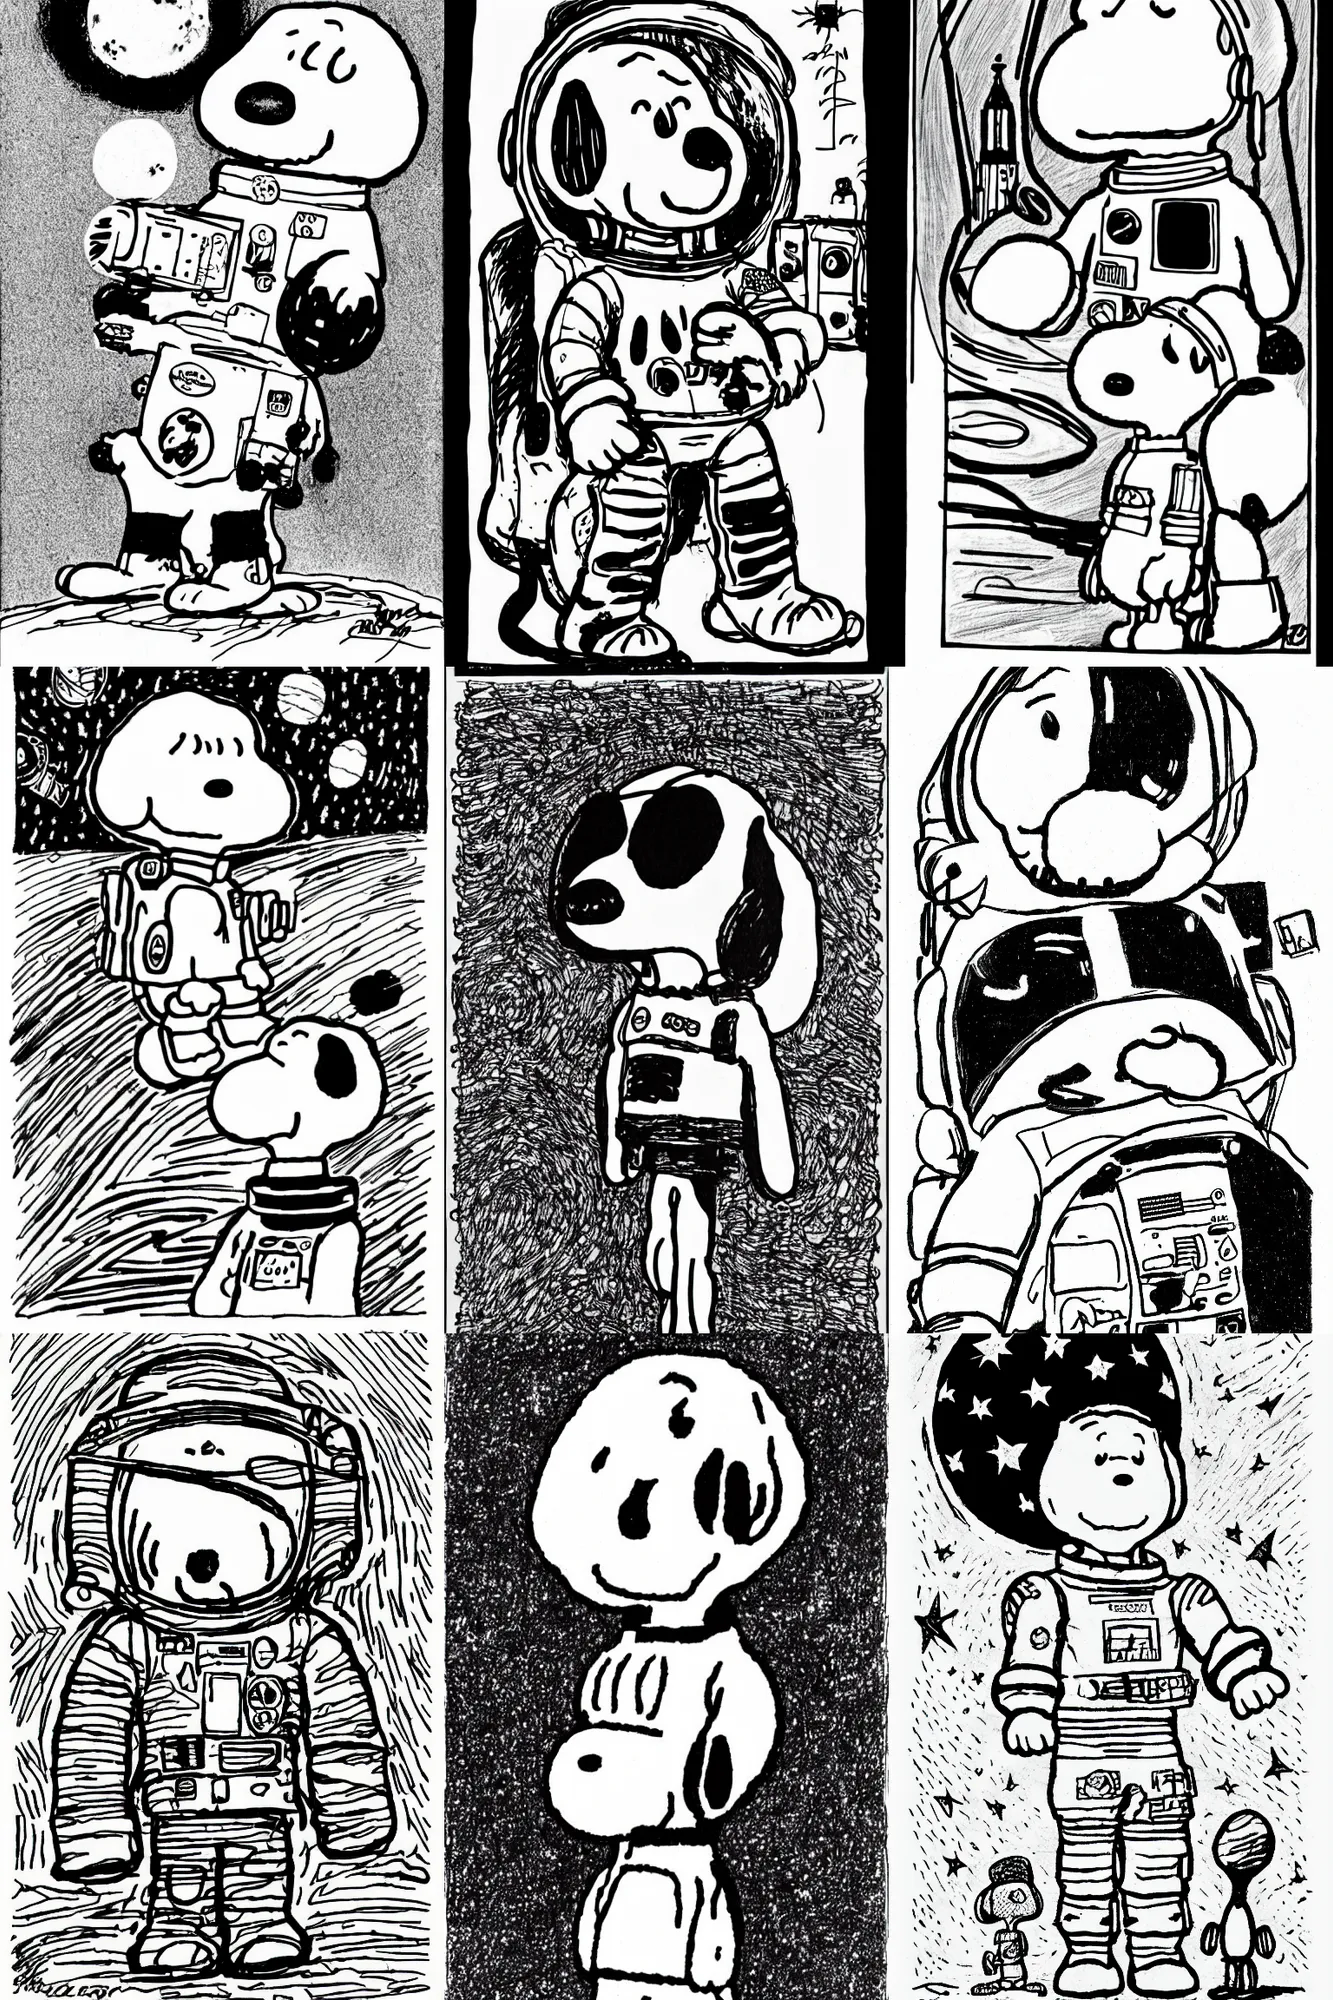 Prompt: portrait of snoopy in a space suit, line drawing, black and white, by charles m. schulz